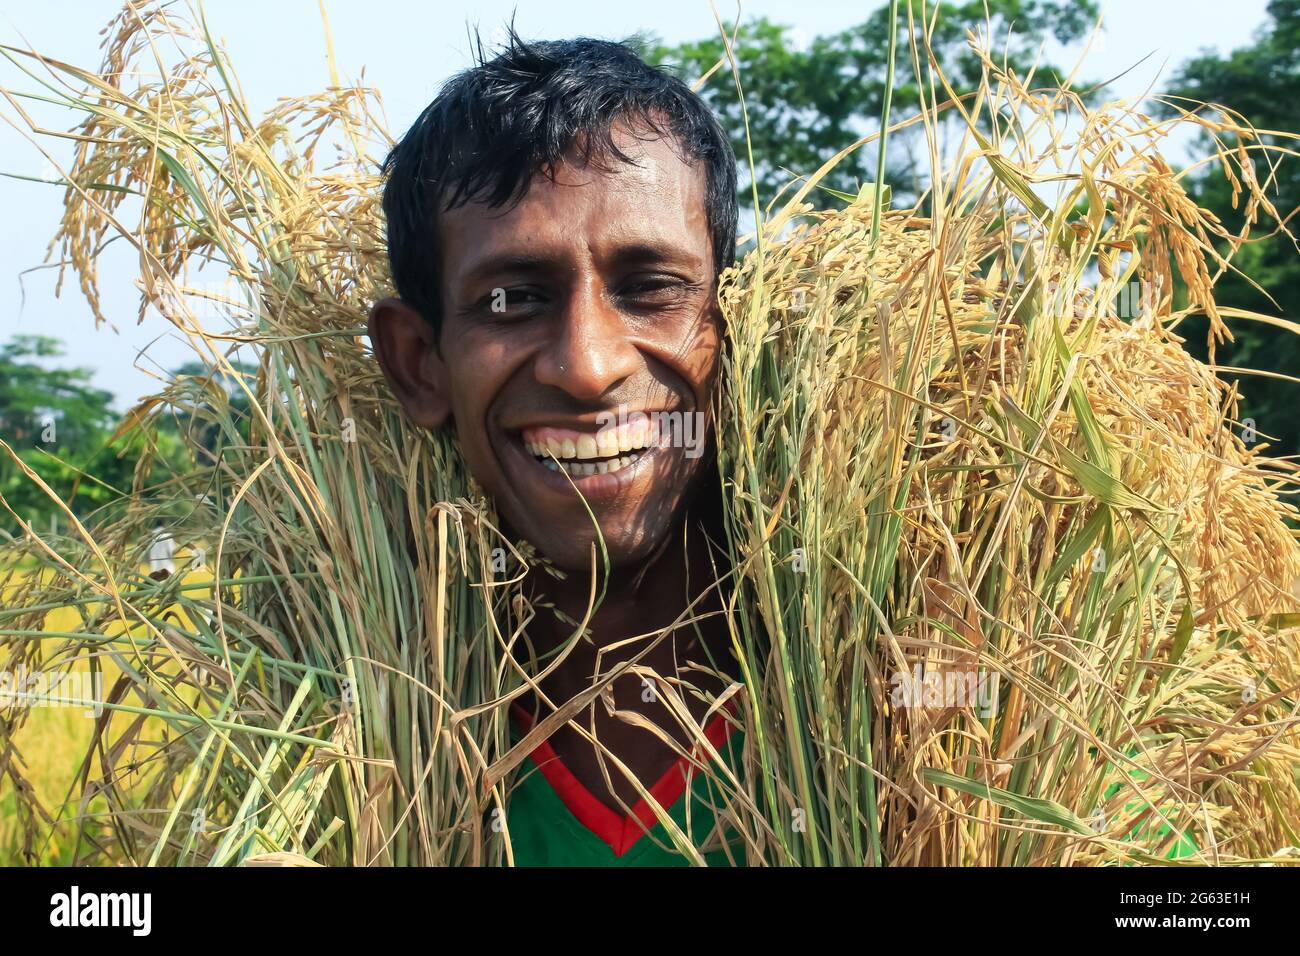 Bangladeshi farmer smiling for cut and collects paddy after harvest. Stock Photo